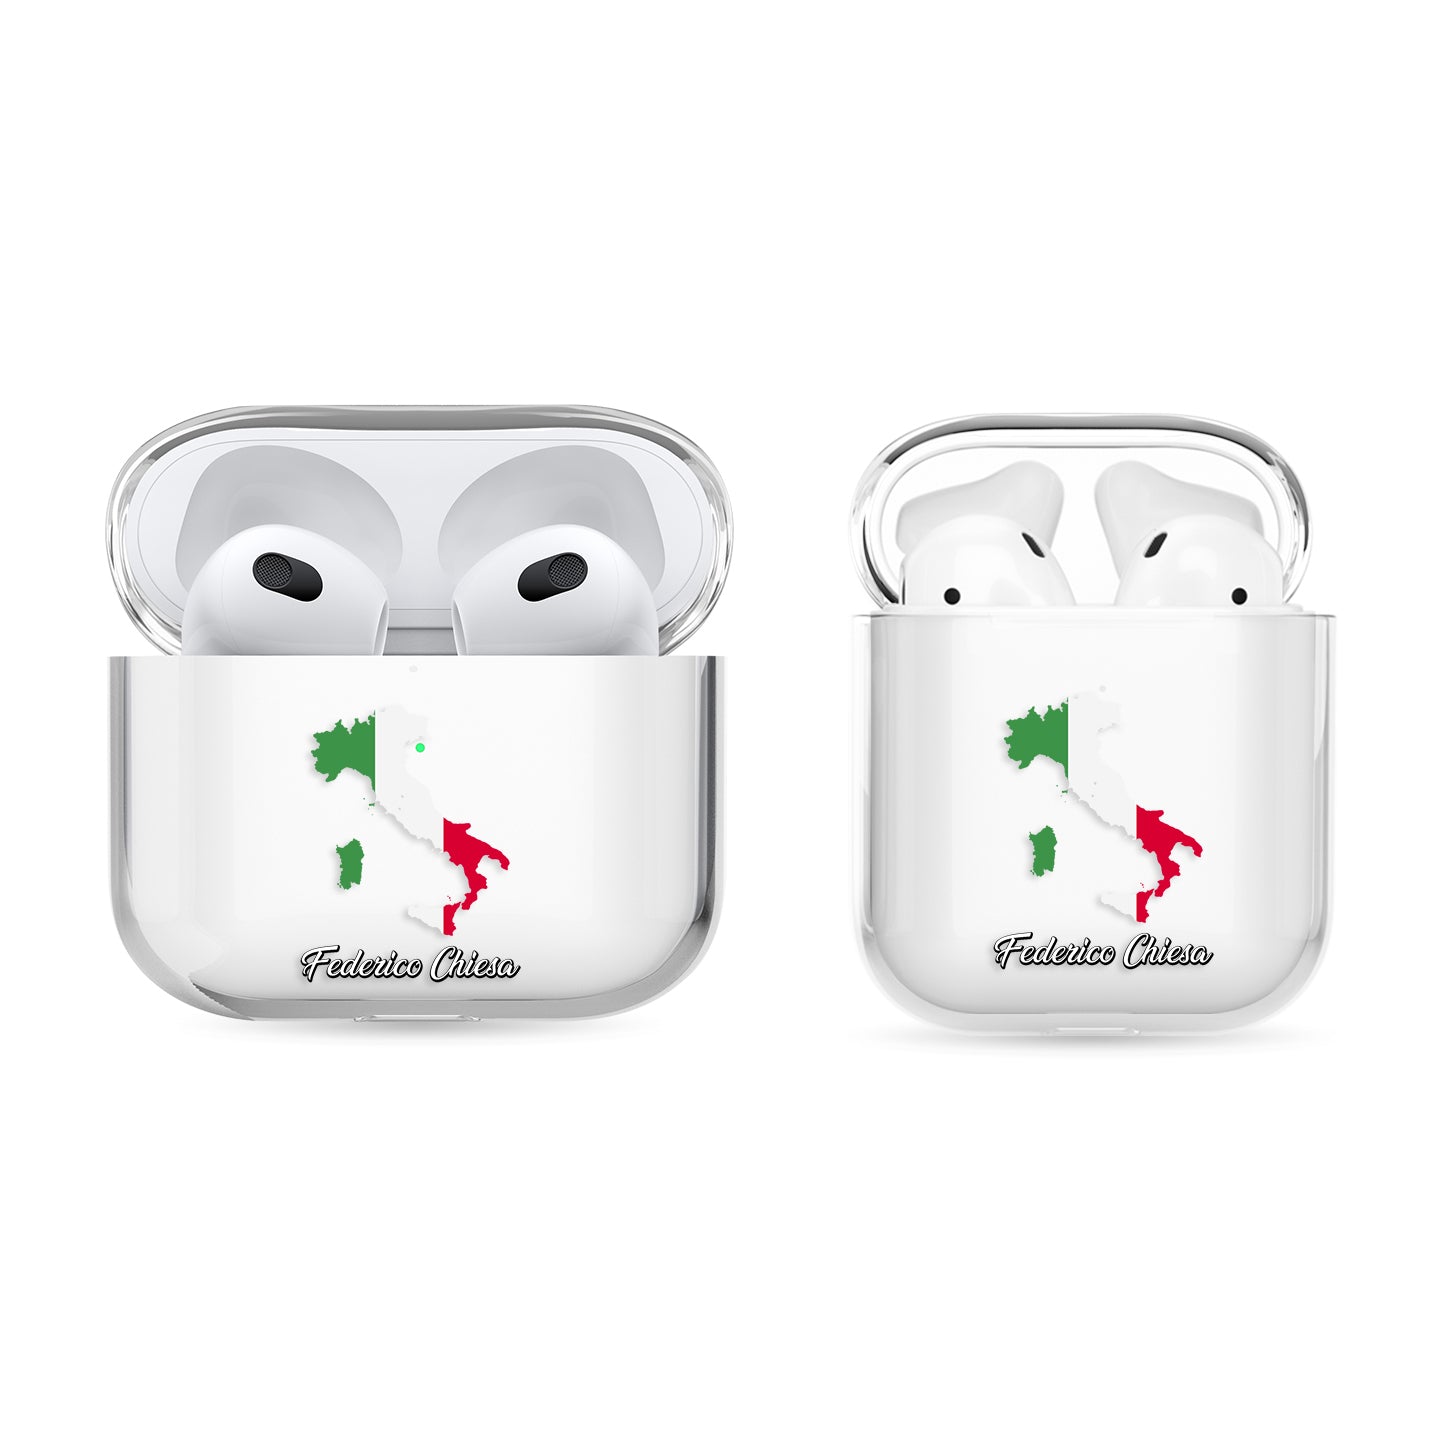 Airpods Hülle - Italien Flagge - 1instaphone